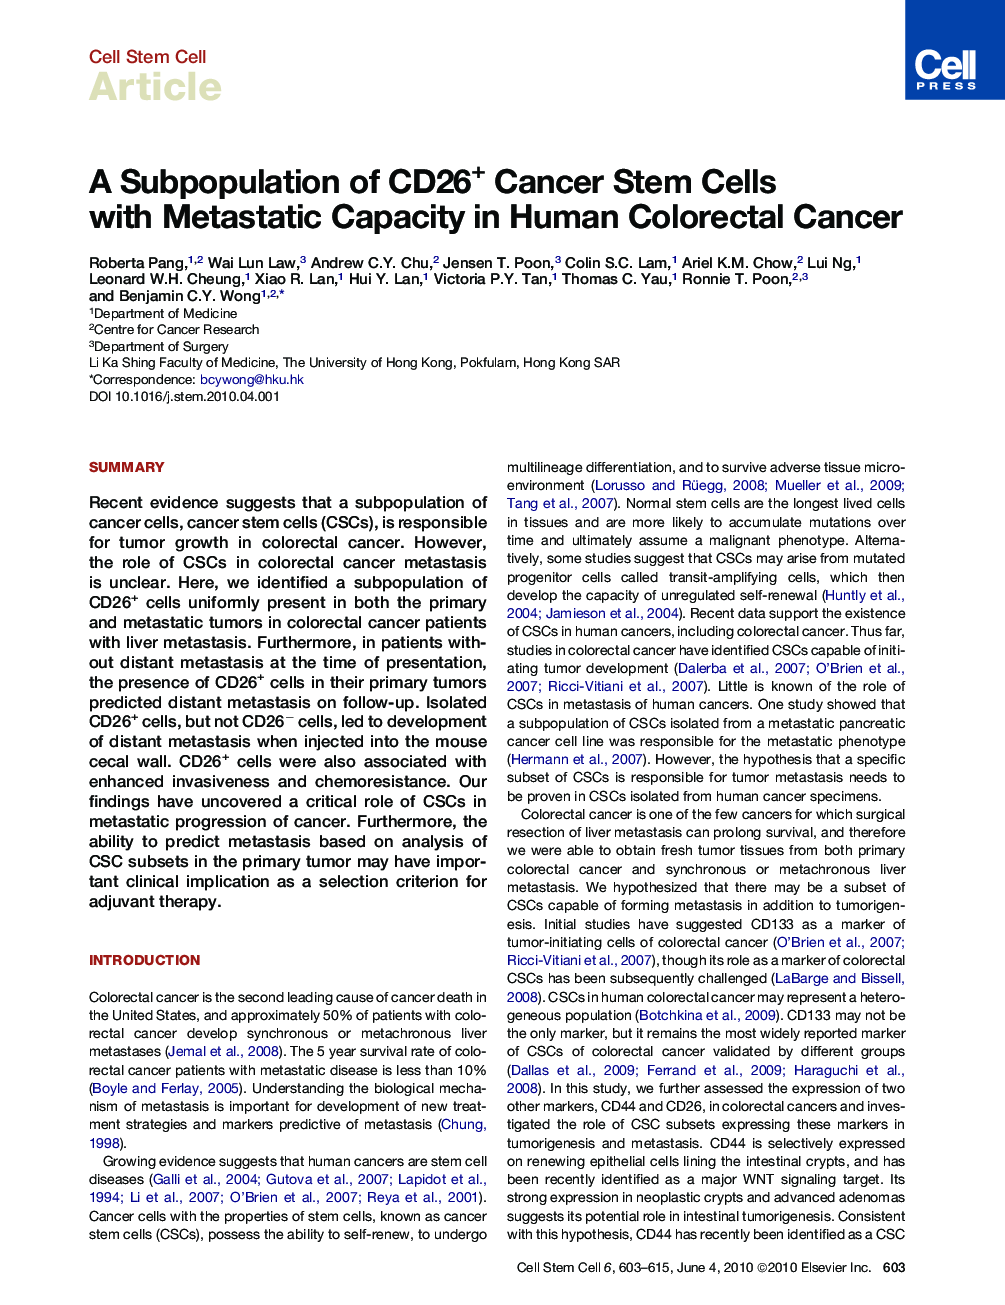 A Subpopulation of CD26+ Cancer Stem Cells with Metastatic Capacity in Human Colorectal Cancer